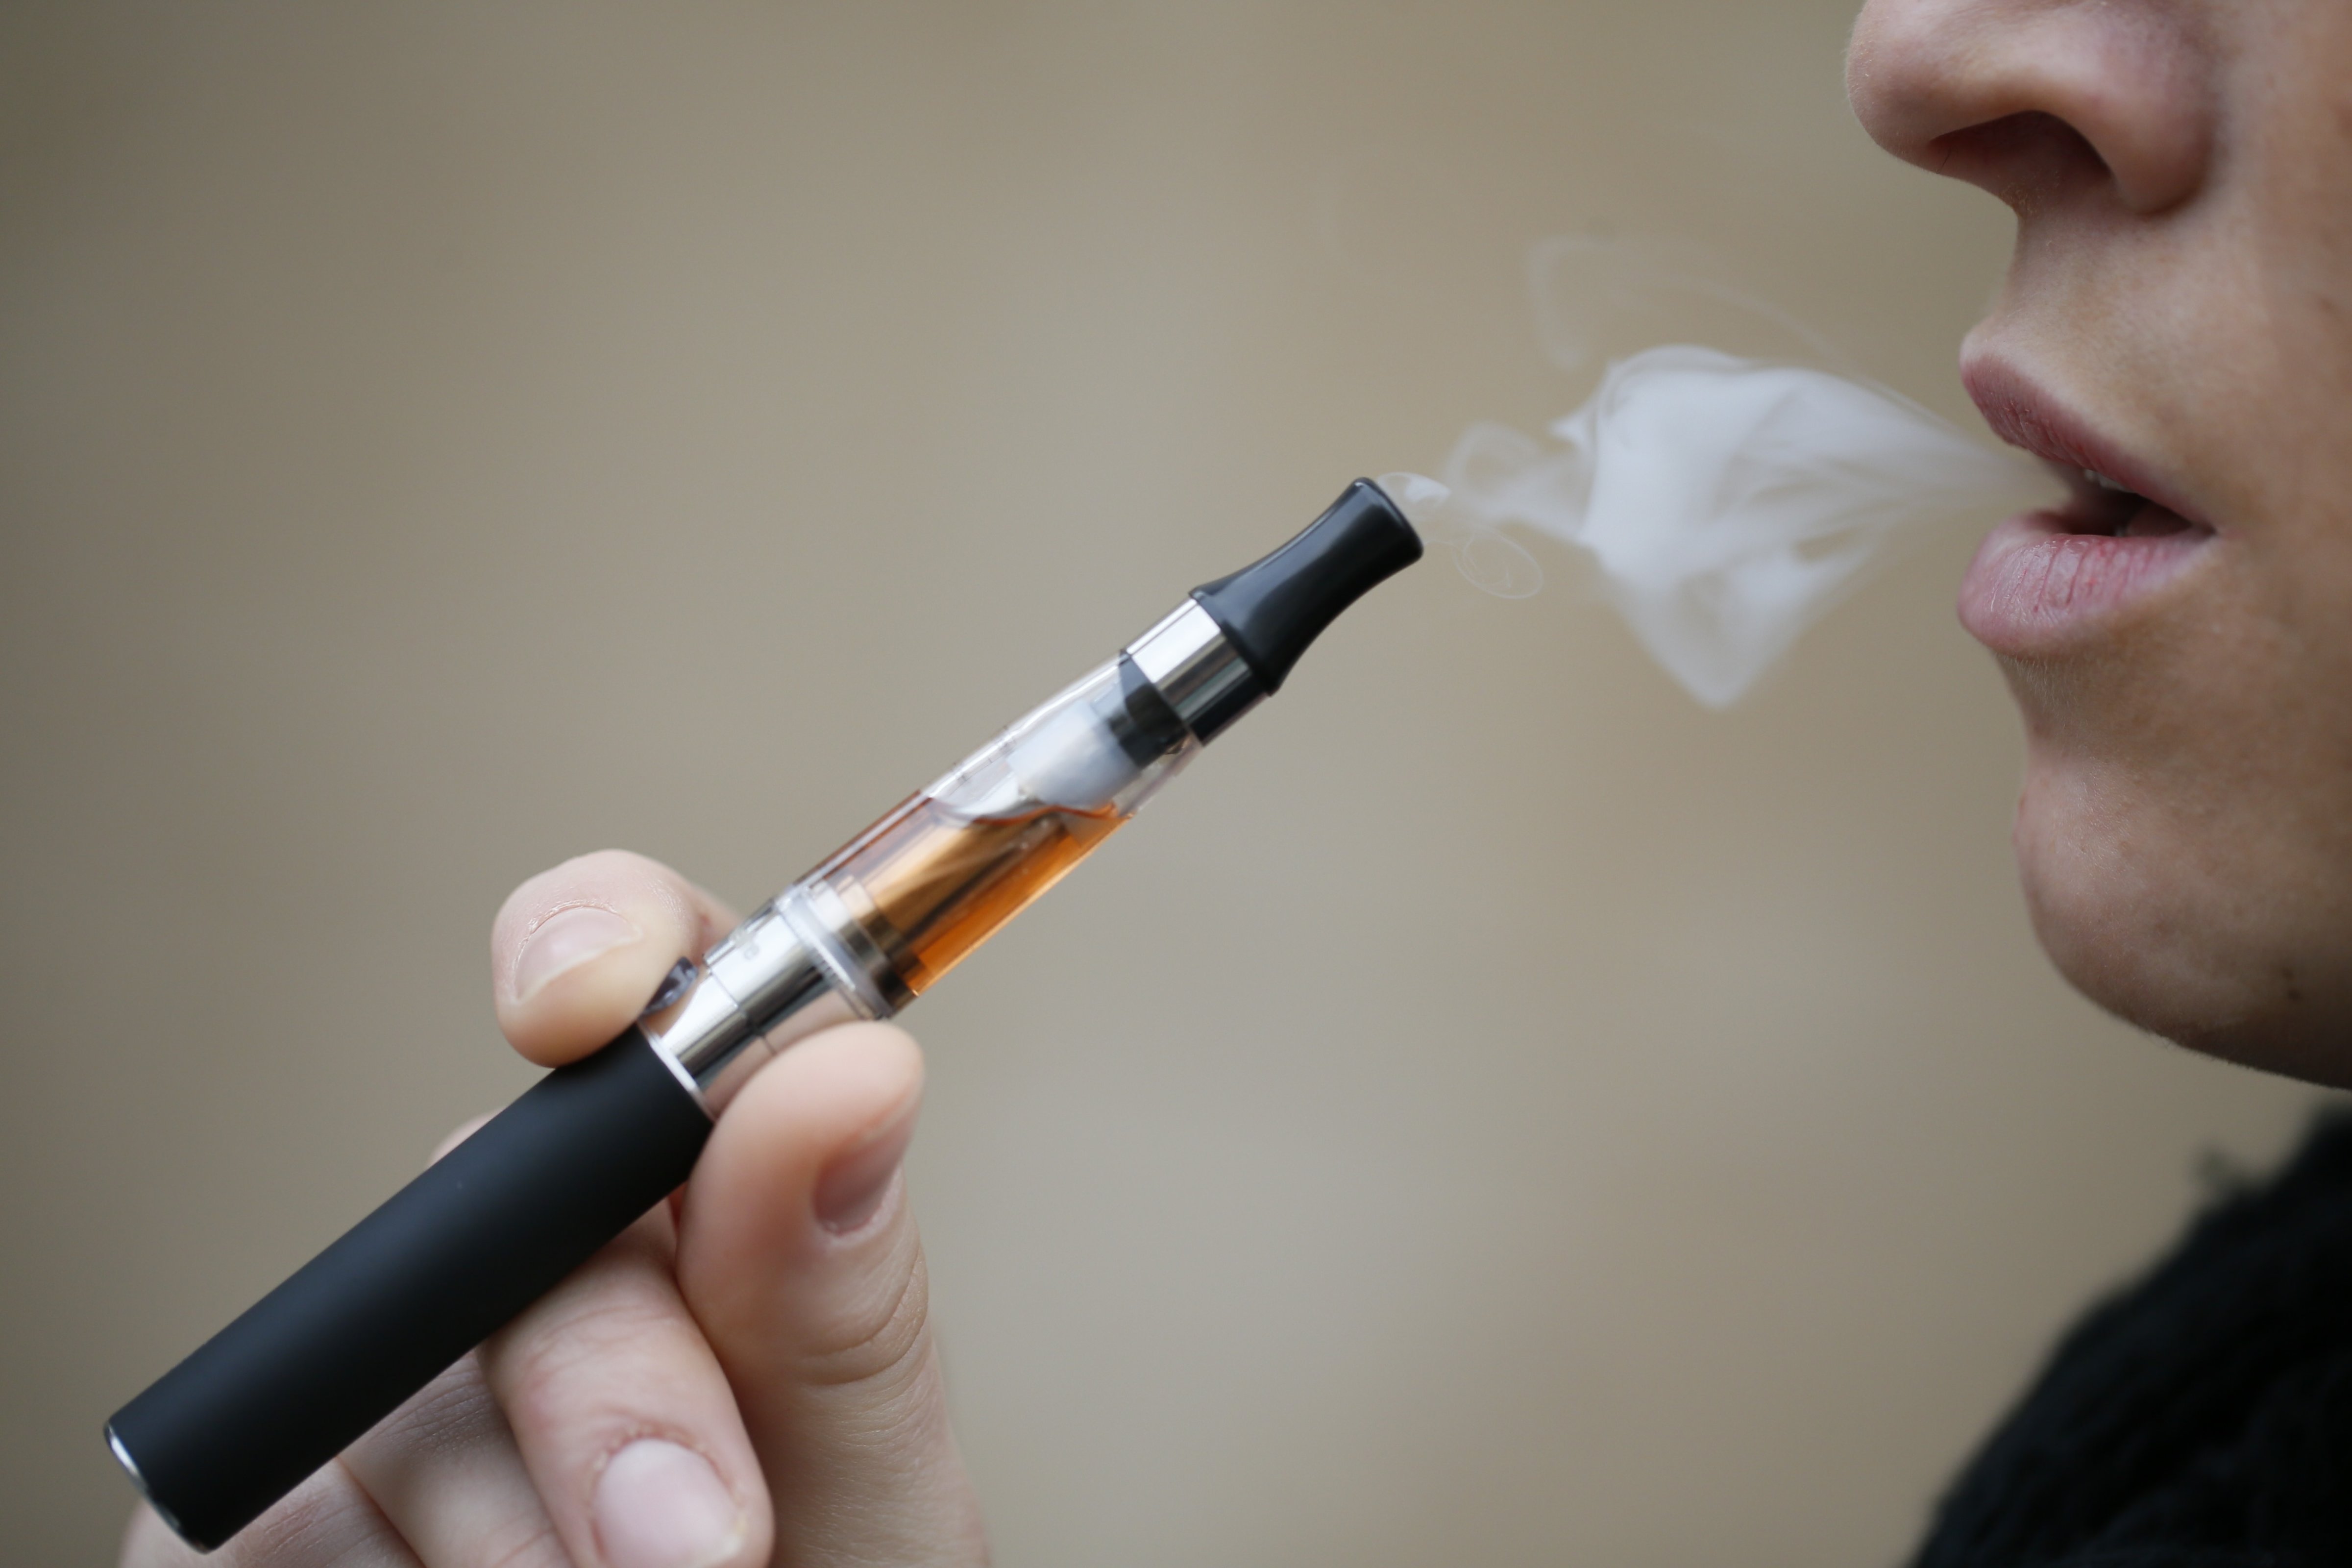 An e-cigarette in Paris on March 05, 2013. (Kenzo Tribouillard—AFP/Getty Images)